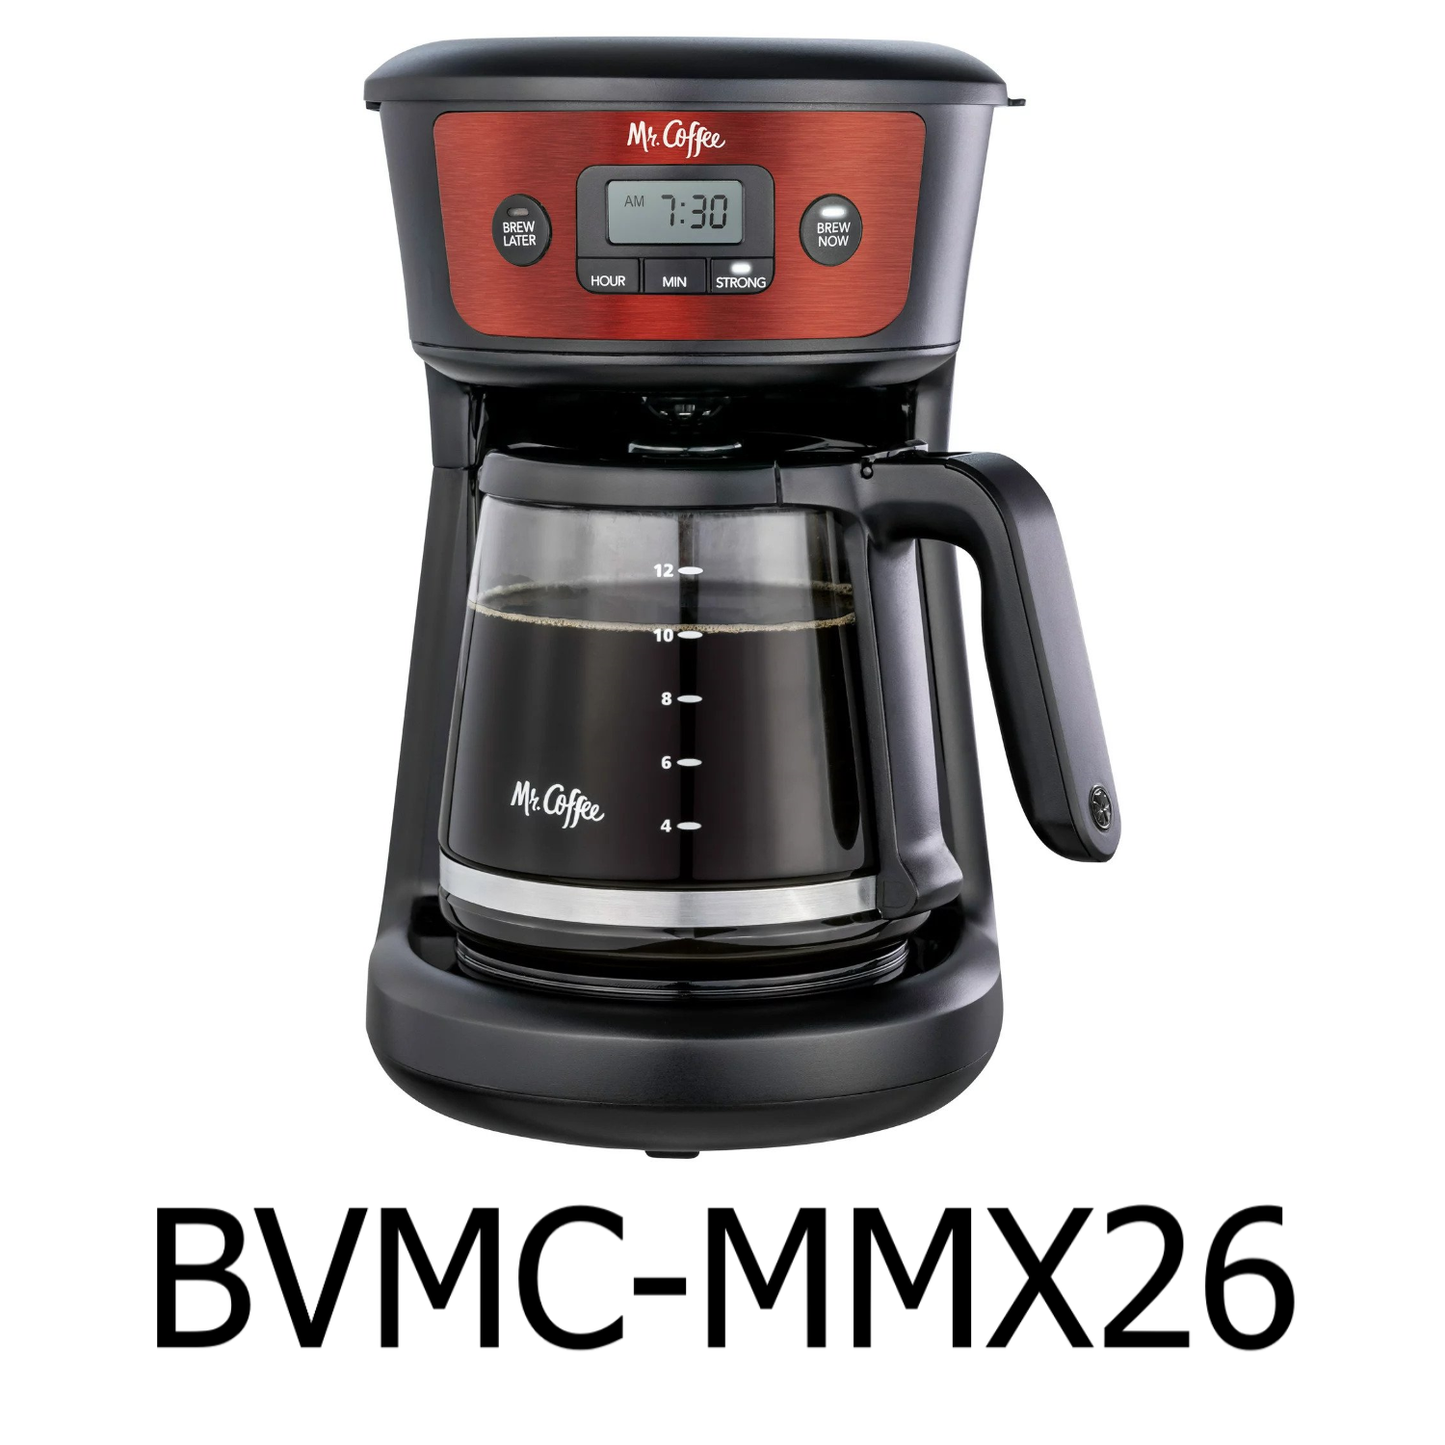 Mr. Coffee 12 Cup Programmable Coffee Maker with Rapid Brew in Silver Mr. Coffee Color: Red